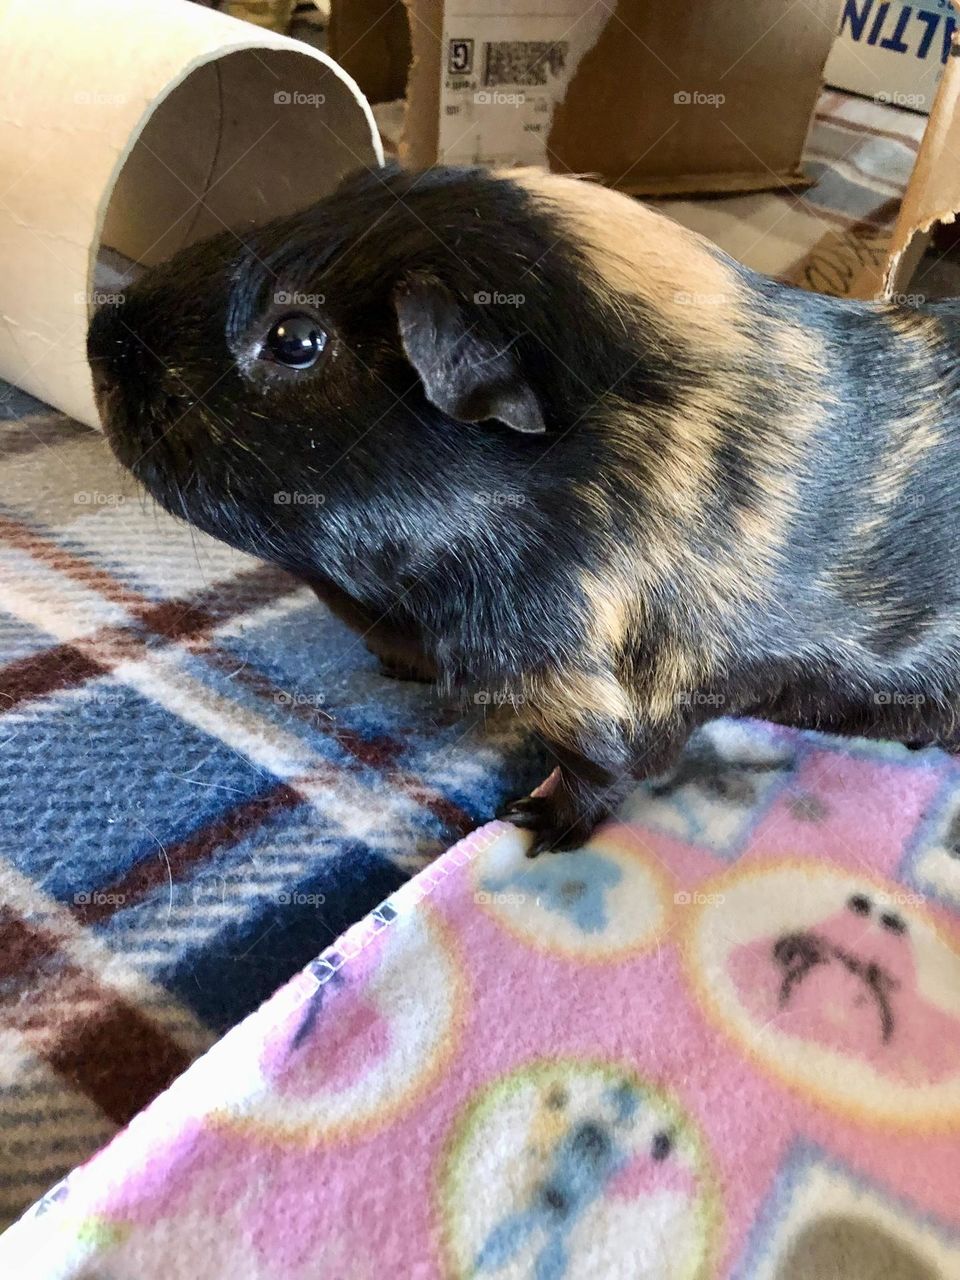 Rocky baby my 3 rd Guinea pig / sweet family pet ❤️